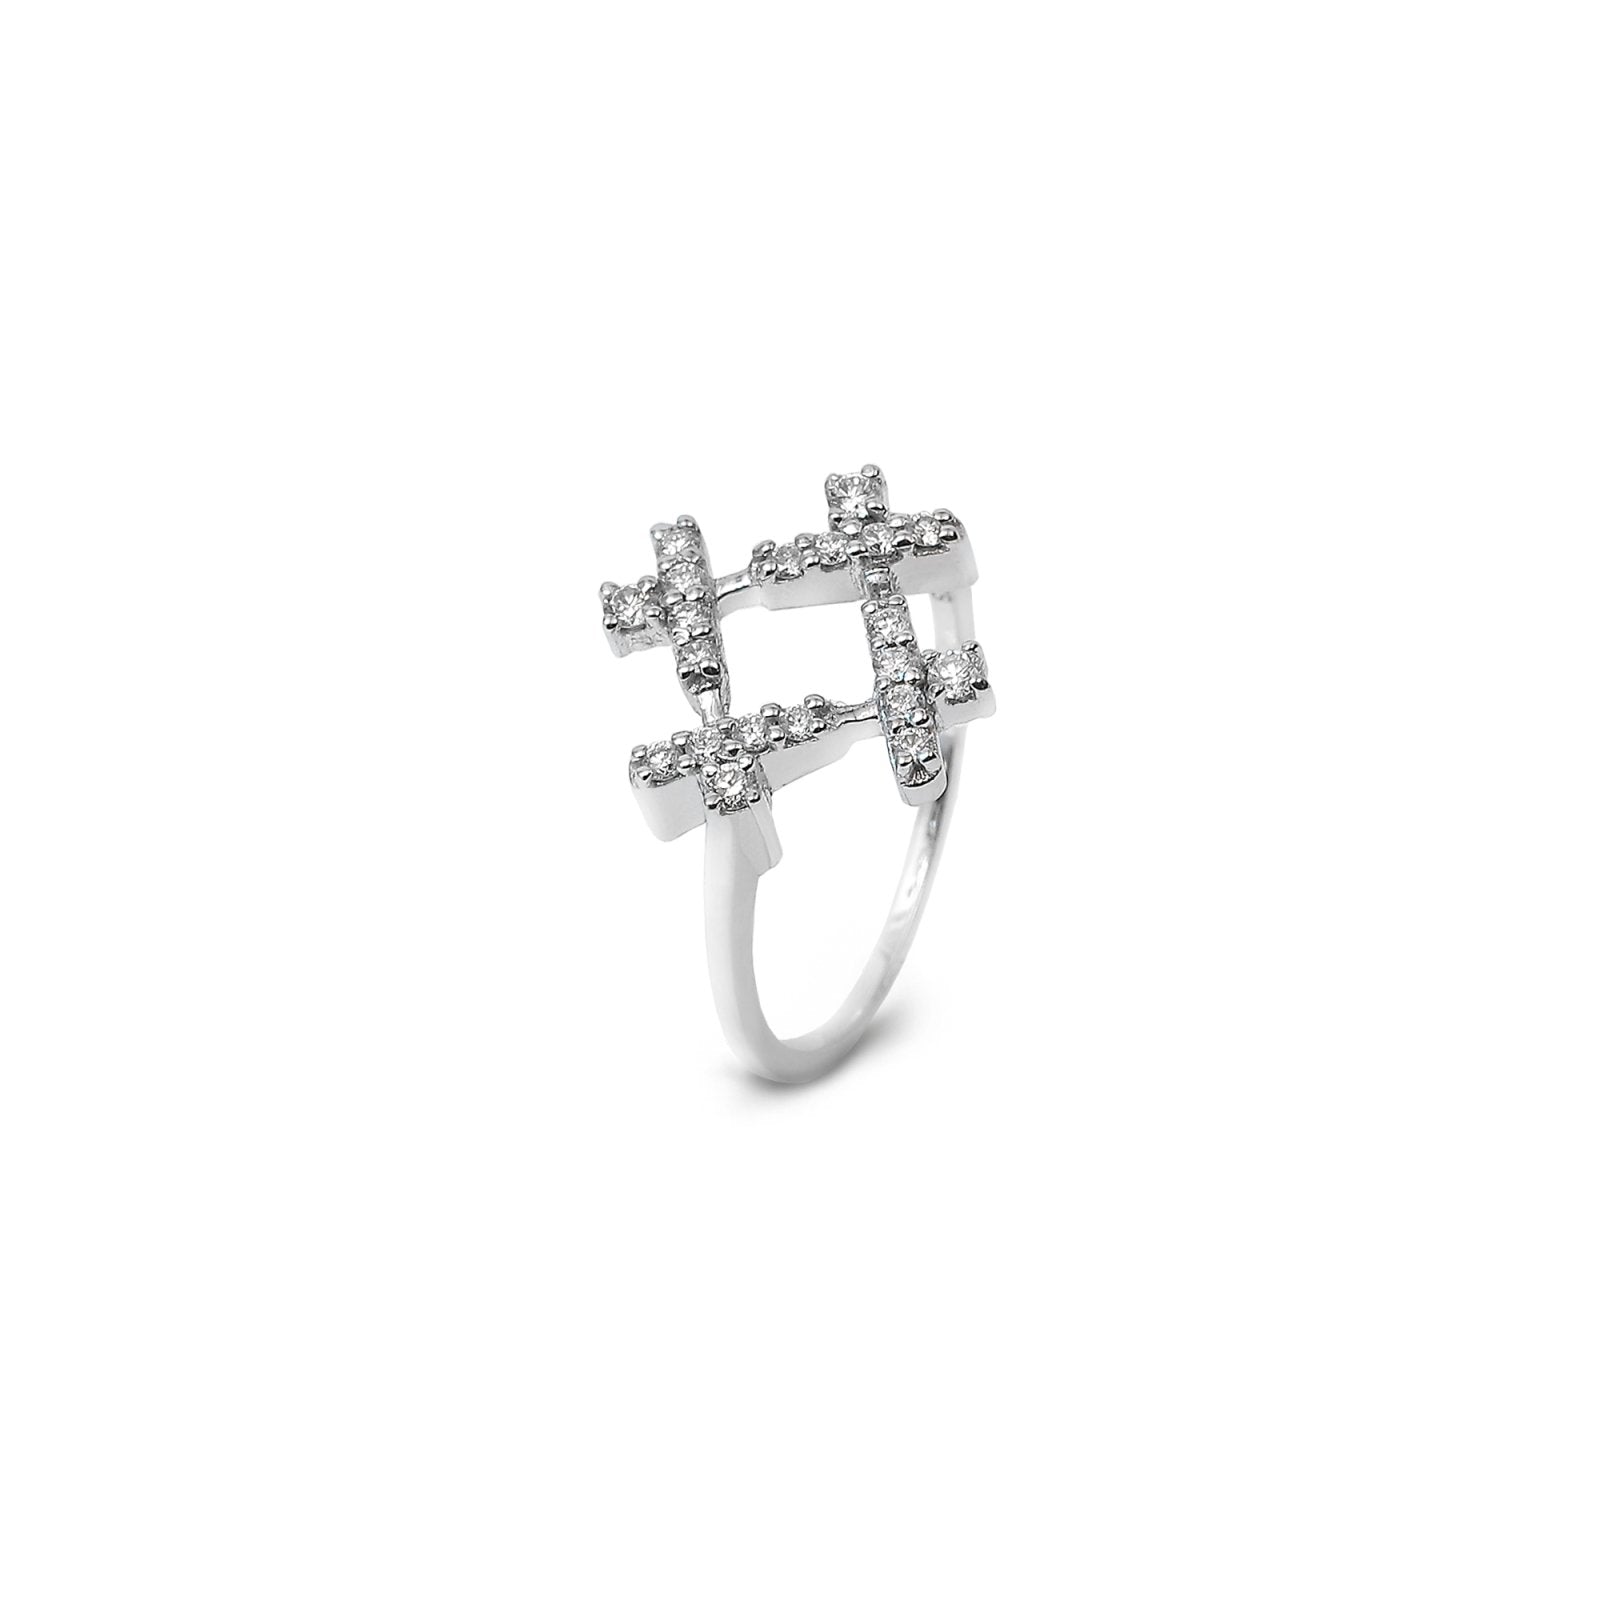 Square Style White Gold Diamond Ring14kTDW:0.3ct2.13gr